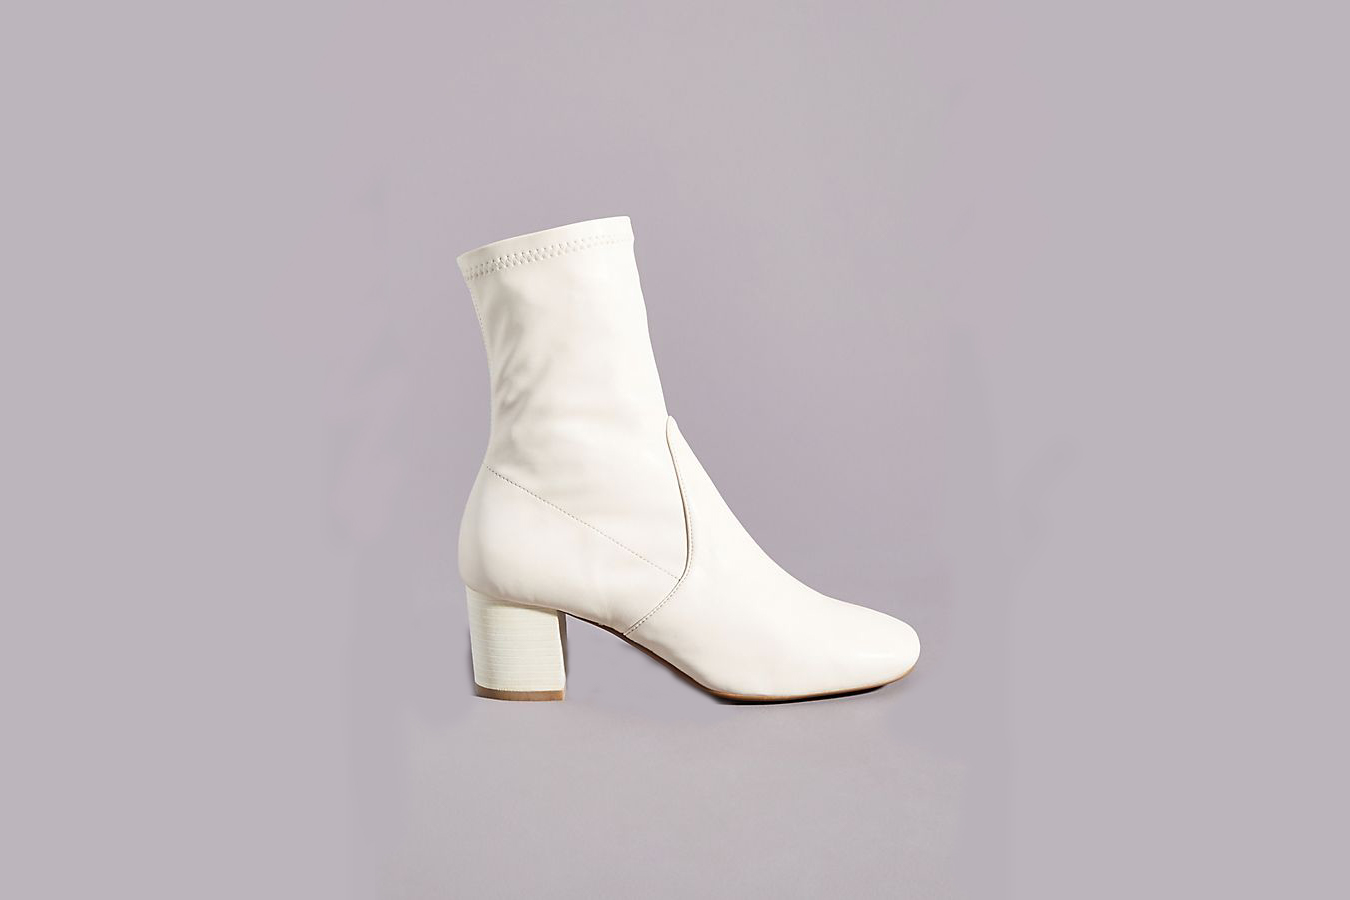 Anthropologie white booties